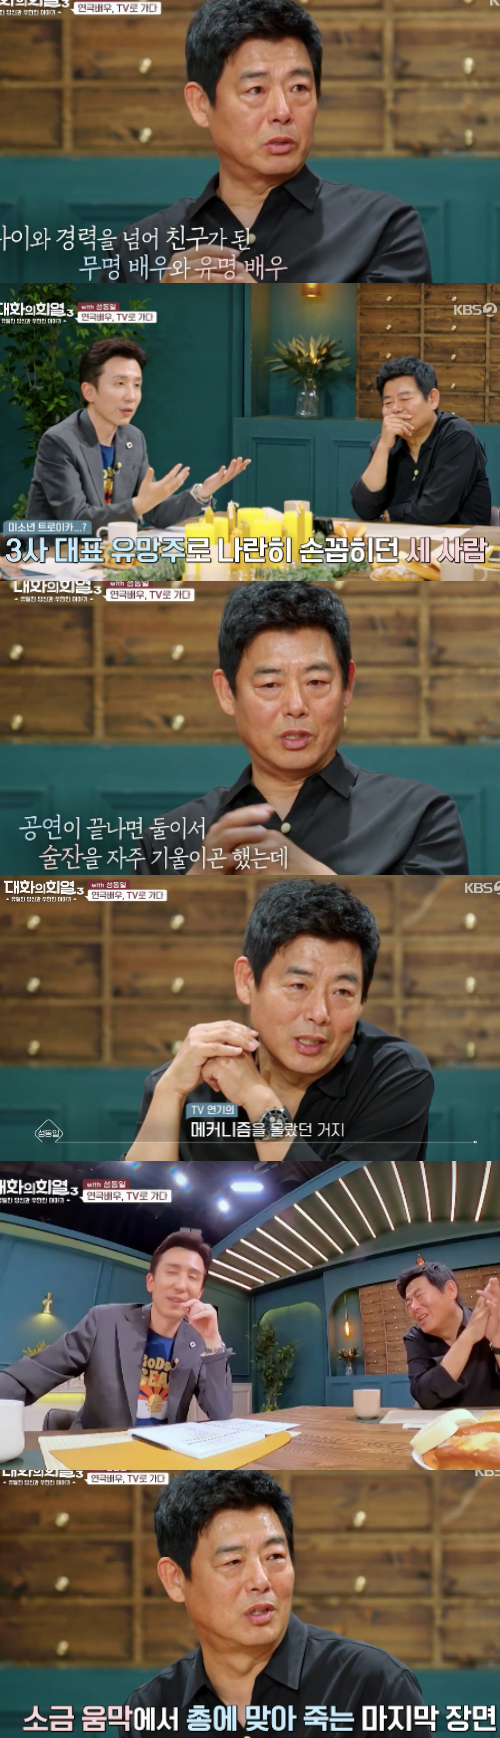 In the Delight of Dialogue 3, Sung Dong-il was shocked to confess that the total profit he earned for 10 years with Kim Young was 1.2 million won, following his heartbreaking childhood, where he lived without his name and family name for 10 years.The actor Sung Dong-il appeared on KBS 2TVs Hye-Yeol Season 3 of Dialogue broadcast on the 22nd.You Hee-yeol introduced Sung Dong-il, the 30th anniversary of his debut this year, saying, If you add up the play, you have postponed 40 years and a lifetime.When asked about his dreams during his school days, Sung Dong-il said, I was an adult, and said, It was a dream to live alone at home.Sung Dong-il, who was a boy who had no name in his adulthood, said, I did not even climb to my family, so I found my name until I was 10 years old in elementary school. I have never seen my father, the local adults called him Jonghoon, who built it,After that, I had to put it on my family register to enter the school, and I found my father who had broken up.One day, Im your father, my first father, my parents reunited that day, put it on my family register, and went to school, Sung Dong-il recalled.But it was worse between my parents.Sung Dong-il said, I did not want to blame my parents, but rather I wanted to have their bad relationship because of me.Sung Dong-il said, My mother has been living in the streets for a lifetime, and my mother who could not afford to take care of her child, and I did not talk about going to school.When my mother made a single decision, she told me to pick out what I wanted to buy one day, Sung Dong-il said. My mother told me how to leave you when she saw me choosing a bowl of rice in my sportswear, and my mother did not give up her life.He then made his debut as a SBS bond talent in 1991, and his move to TV was because he did not want to suffer his mother anymore.Sung Dong-il, who lived as Kim Young at the time, was shocked by the fact that the total income for 10 years was 1.2 million won.All of them said, Lee Jung-eun was an actor with an annual salary of 200,000 won, but now he has earned a lot.In addition, he had a hard time for another 10 years, he had to eat and live.I am an actor, but entertainment is not an atmosphere because of my pride, he said. Now was the time to appear in entertainment, but it was time to keep my pride.So, Sung Dong-il, whose acting skills were full in the work Chuno, was praised as Sung Dong-il.But when you humbly answered that you did not come out much, You Hee-yeol recalled a person named Chun Ji-ho who was all in the memory, saying, The presence is a main character-class new styler.Sung Dong-il said, I am a little different from the concept, I want to be a good father, but the answer is clear. If I live against my father, I am a good father, a good husband.I think you gave me good teachings that you dont have to pass on great property, I think youre positive, I always feel like a father, I just want to live on the other hand, I just want to live on the other hand, Sung Dong-il said.I was told that my father had gone to the funeral, but I didnt go to the funeral, he said, recalling the day his father died. I later found out that my wife had secretly visited before my father died and showed me the young June and Bin, and my wife first introduced her grandchildren and died a few days later.Sung Dong-il said, My wife has been holding a sacrifice for our fathers sacrifice since then, and we have been holding a sacrifice so far. There is nothing to beat my wife. You Hee-yeol was impressed.Sung Dong-il recalled the first rice soup house that met his wife and said, I could not have a wedding ceremony for everyone. Thank you to my wife who made a good family healthy and healthy for all three children.Finally, when asked about the happiest moment for Sung Dong-il, he said, I am the happiest person to go home after shooting and see my children and wife sleeping, he said.The Joy of Dialogue 3 broadcast screen capture